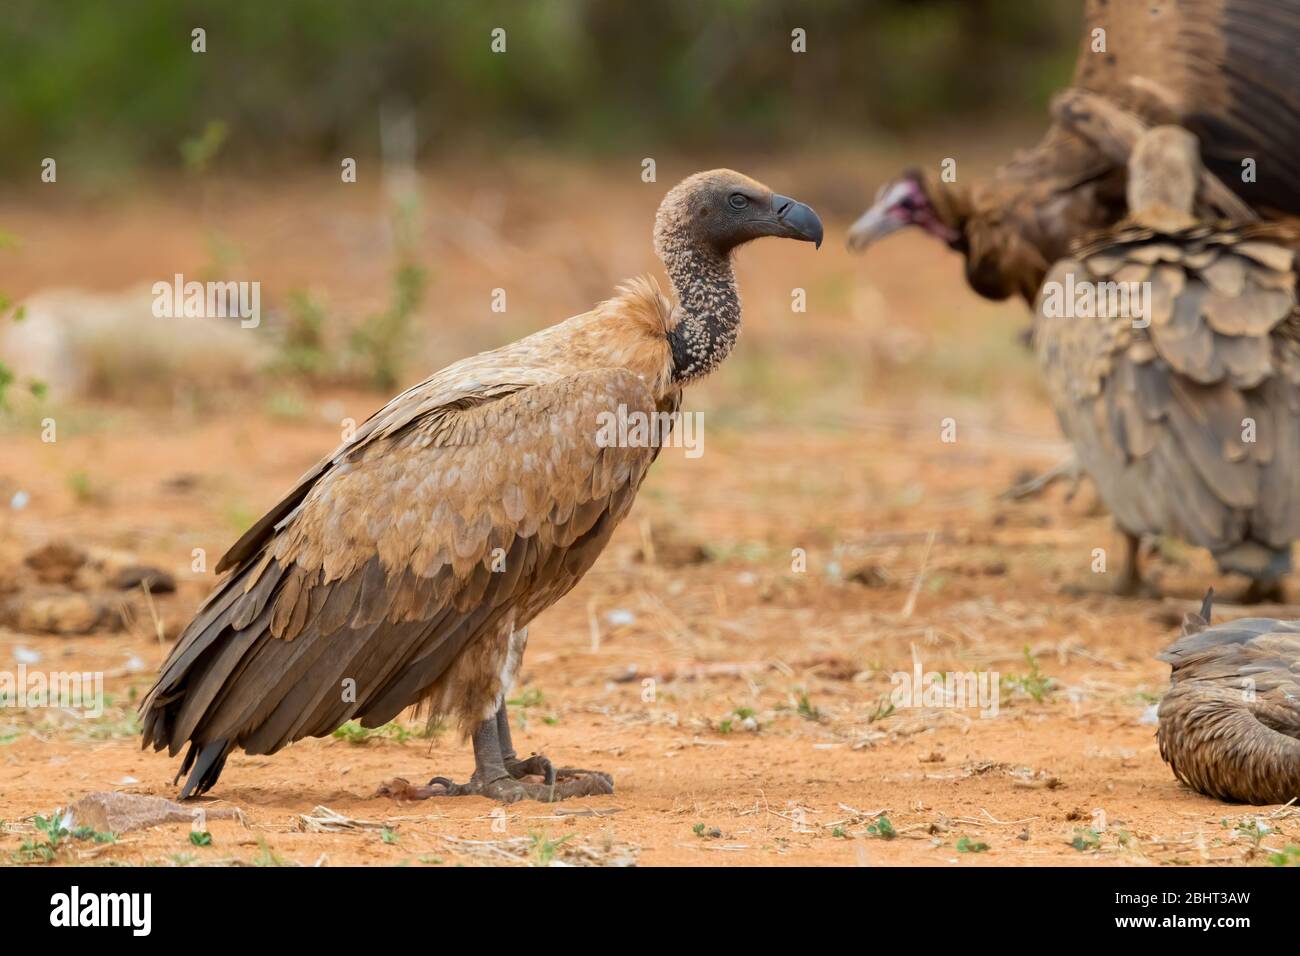 White-backed Vulture (Gyps africanus), side view of an immature standing on the ground, Mpumalanga, South Africa Stock Photo